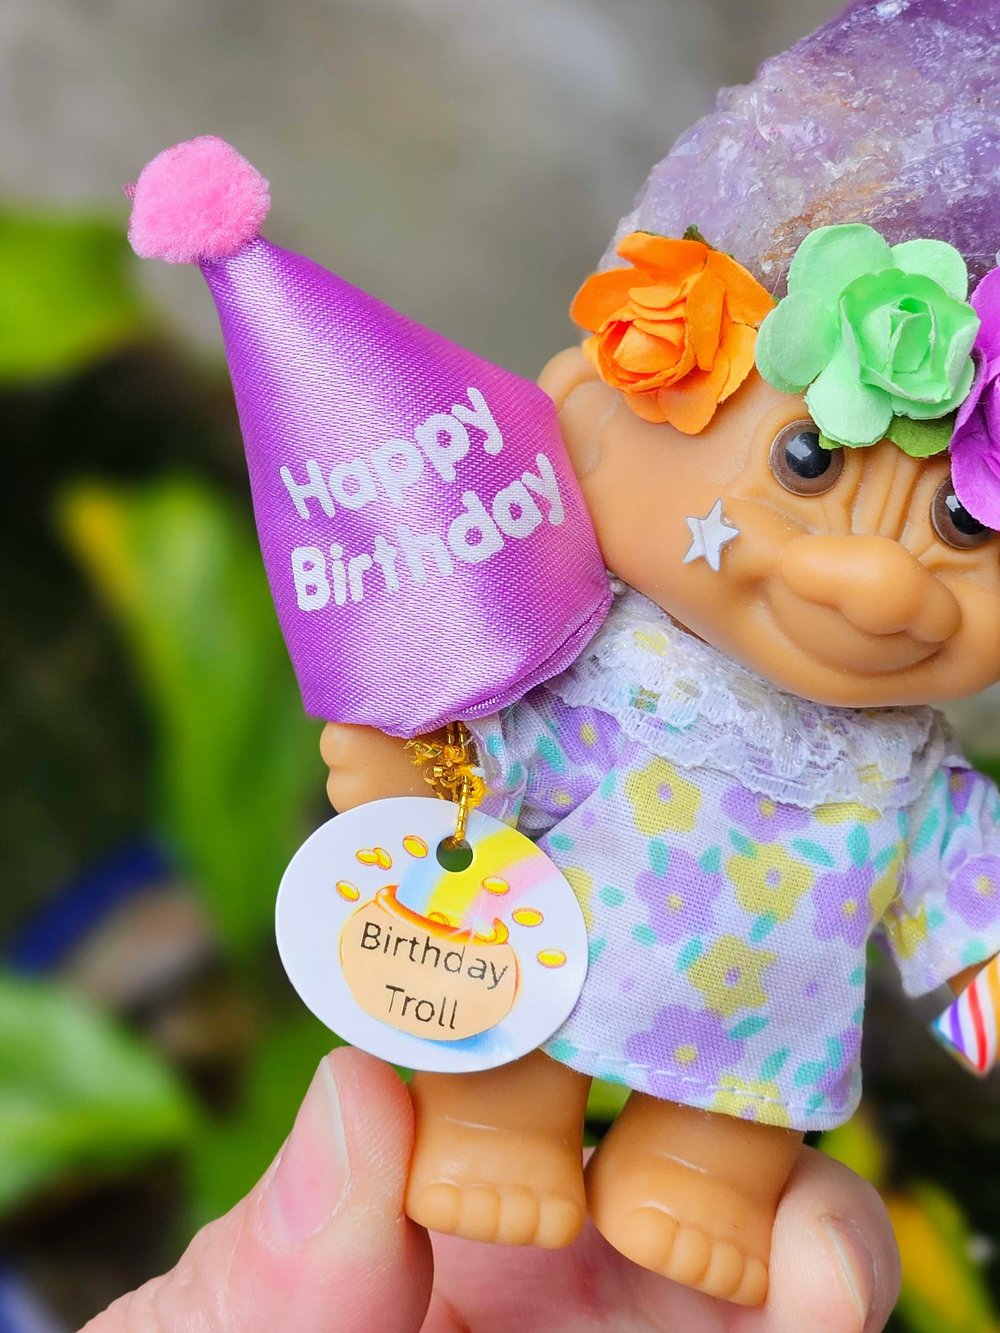 Birthday Bliss Crystal Troll with Party Hat 4.5"